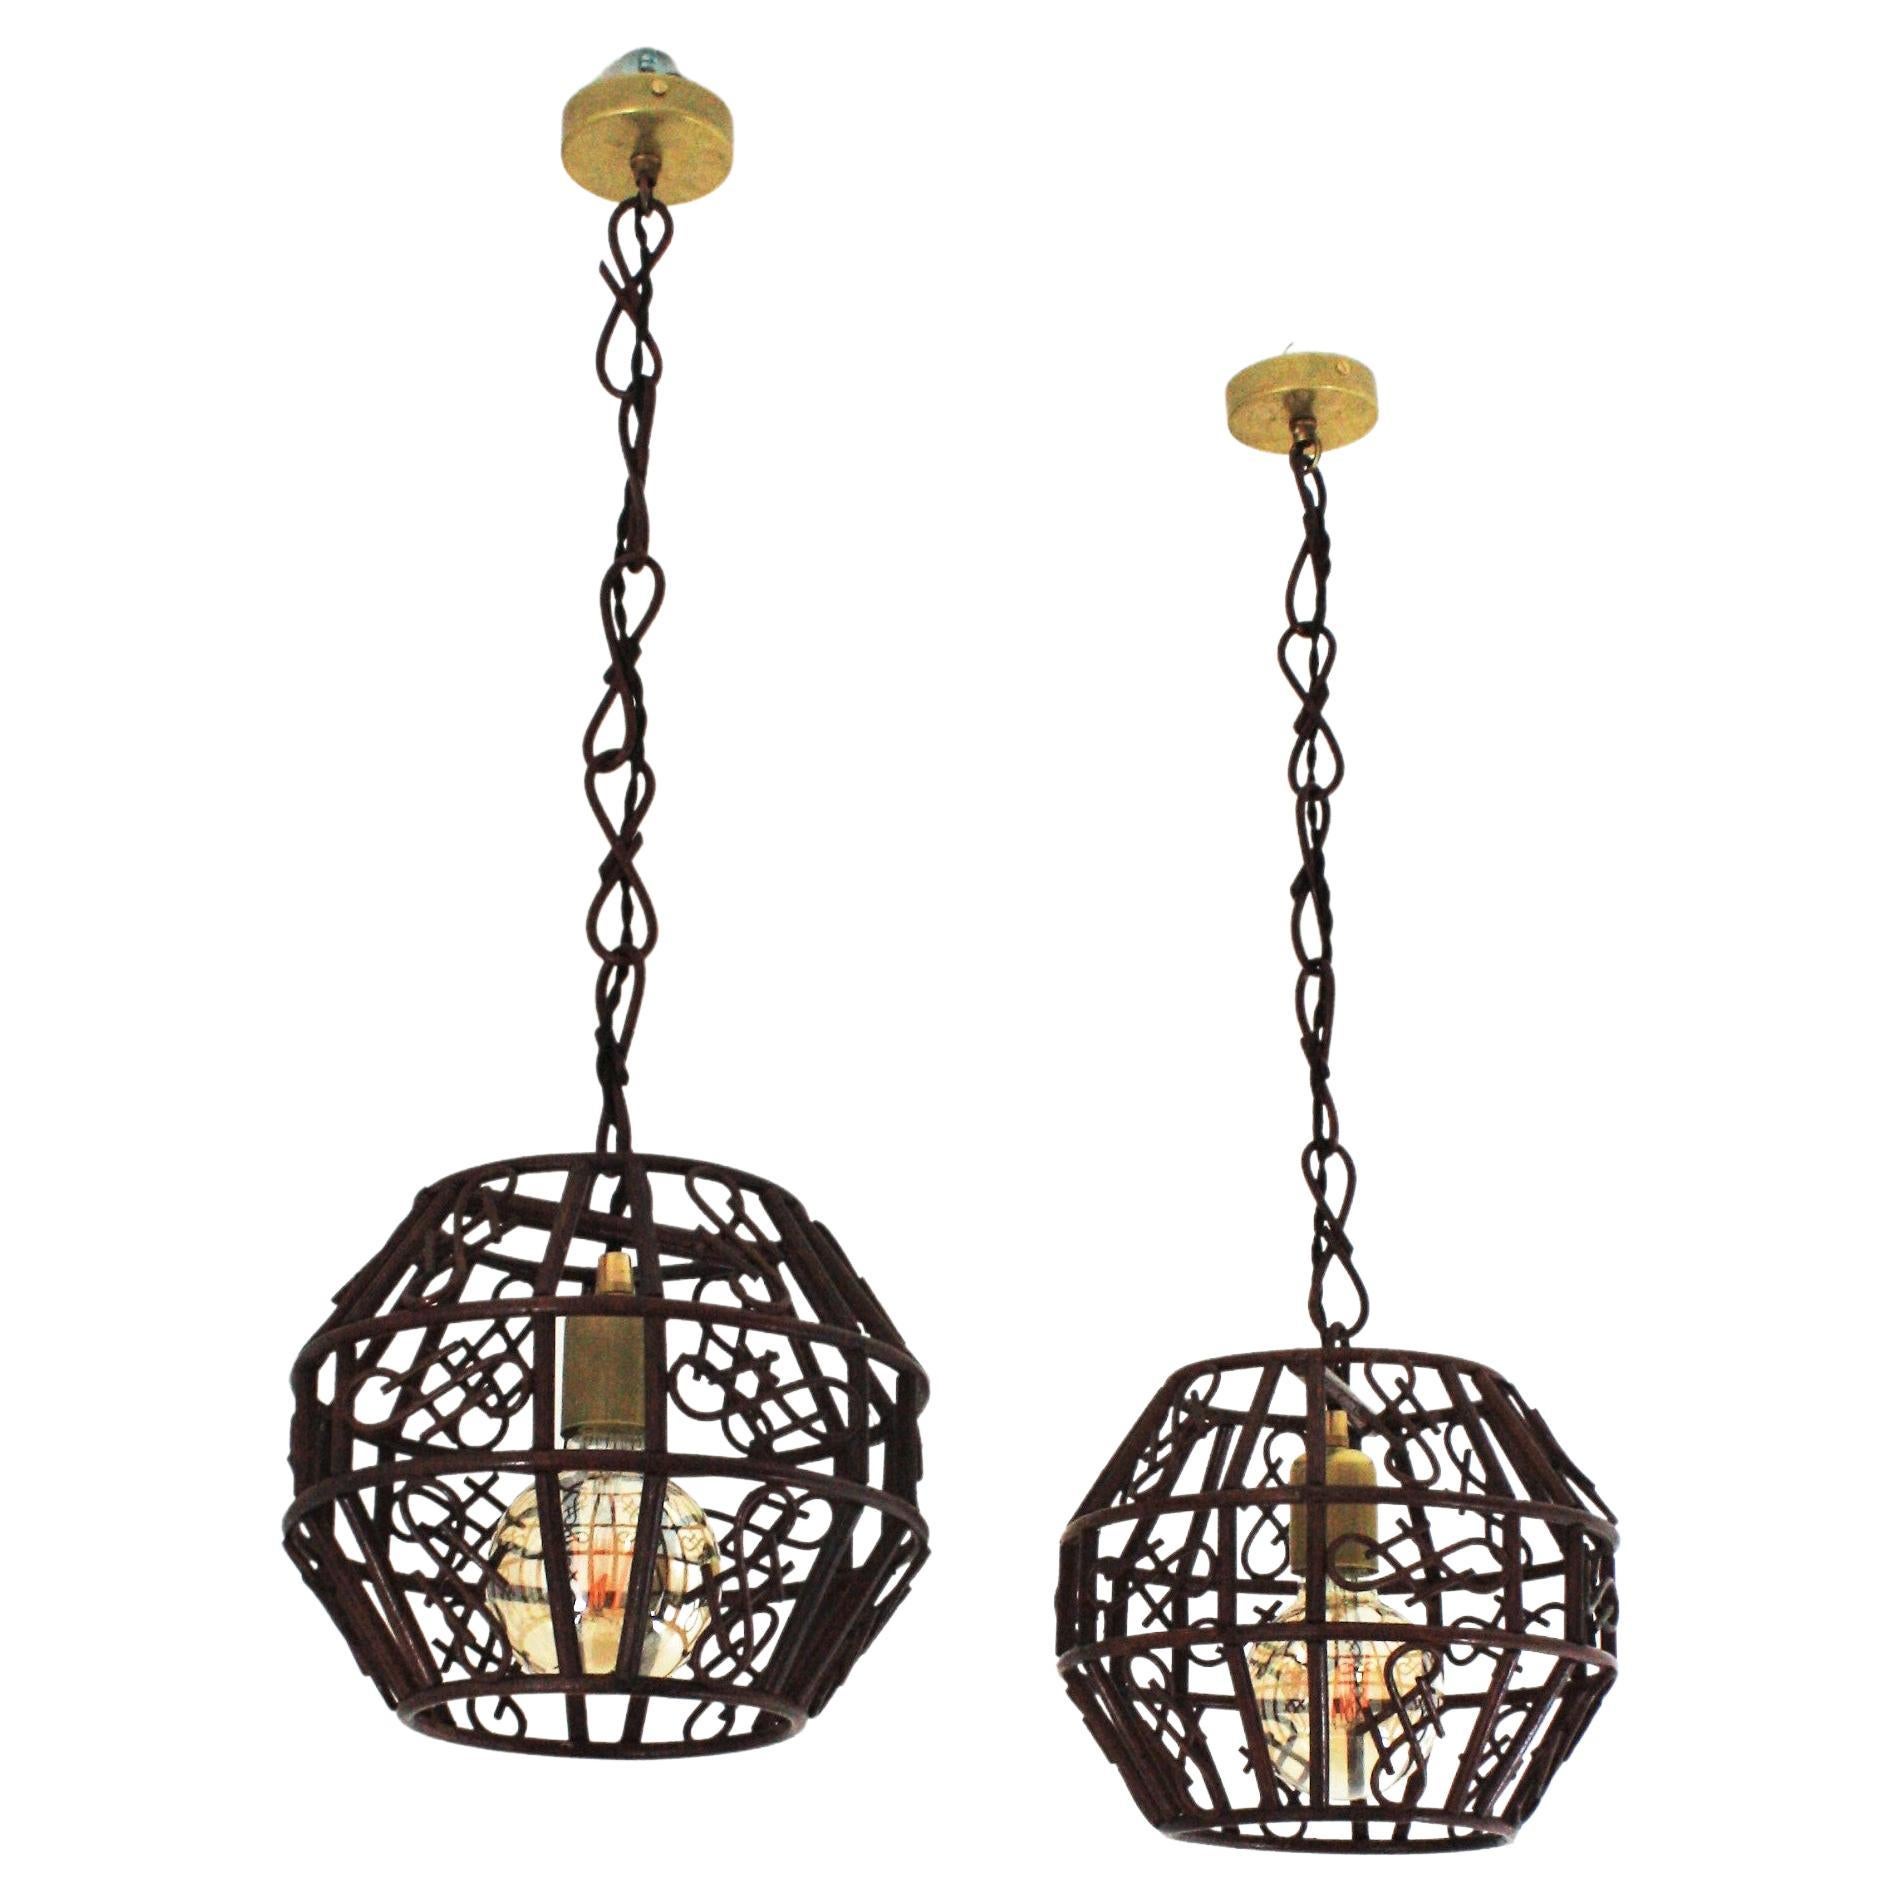 Pair of Rattan Pendants or Lanterns with Chinoiserie Accents, France, 1950s-1960s.
Pair of Mid-Century Modern rattan hanging lamps or lanterns accented by Oriental Details. 
These handcrafted ceiling lamps feature rattan pagoda shaped lanterns